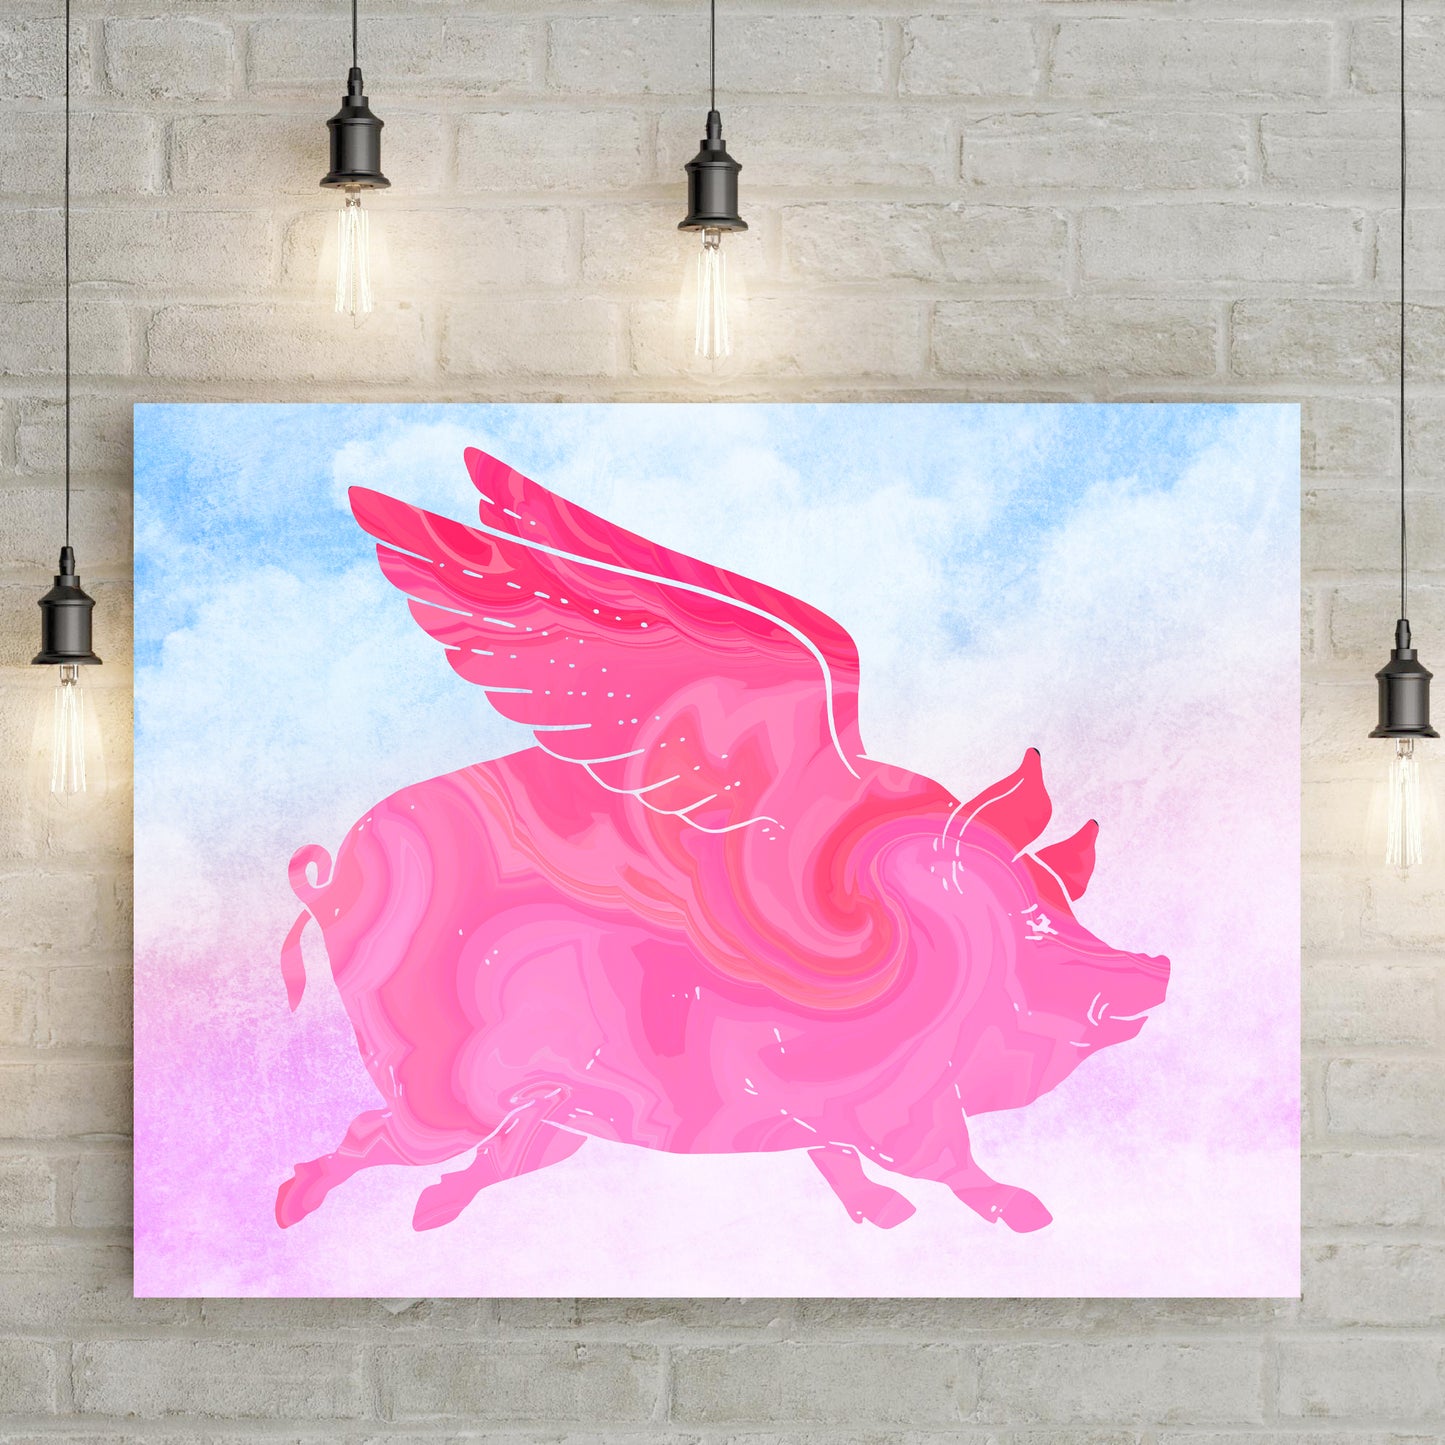 Flying Pig Artwork Canvas Wall Art - Image by Tailored Canvases